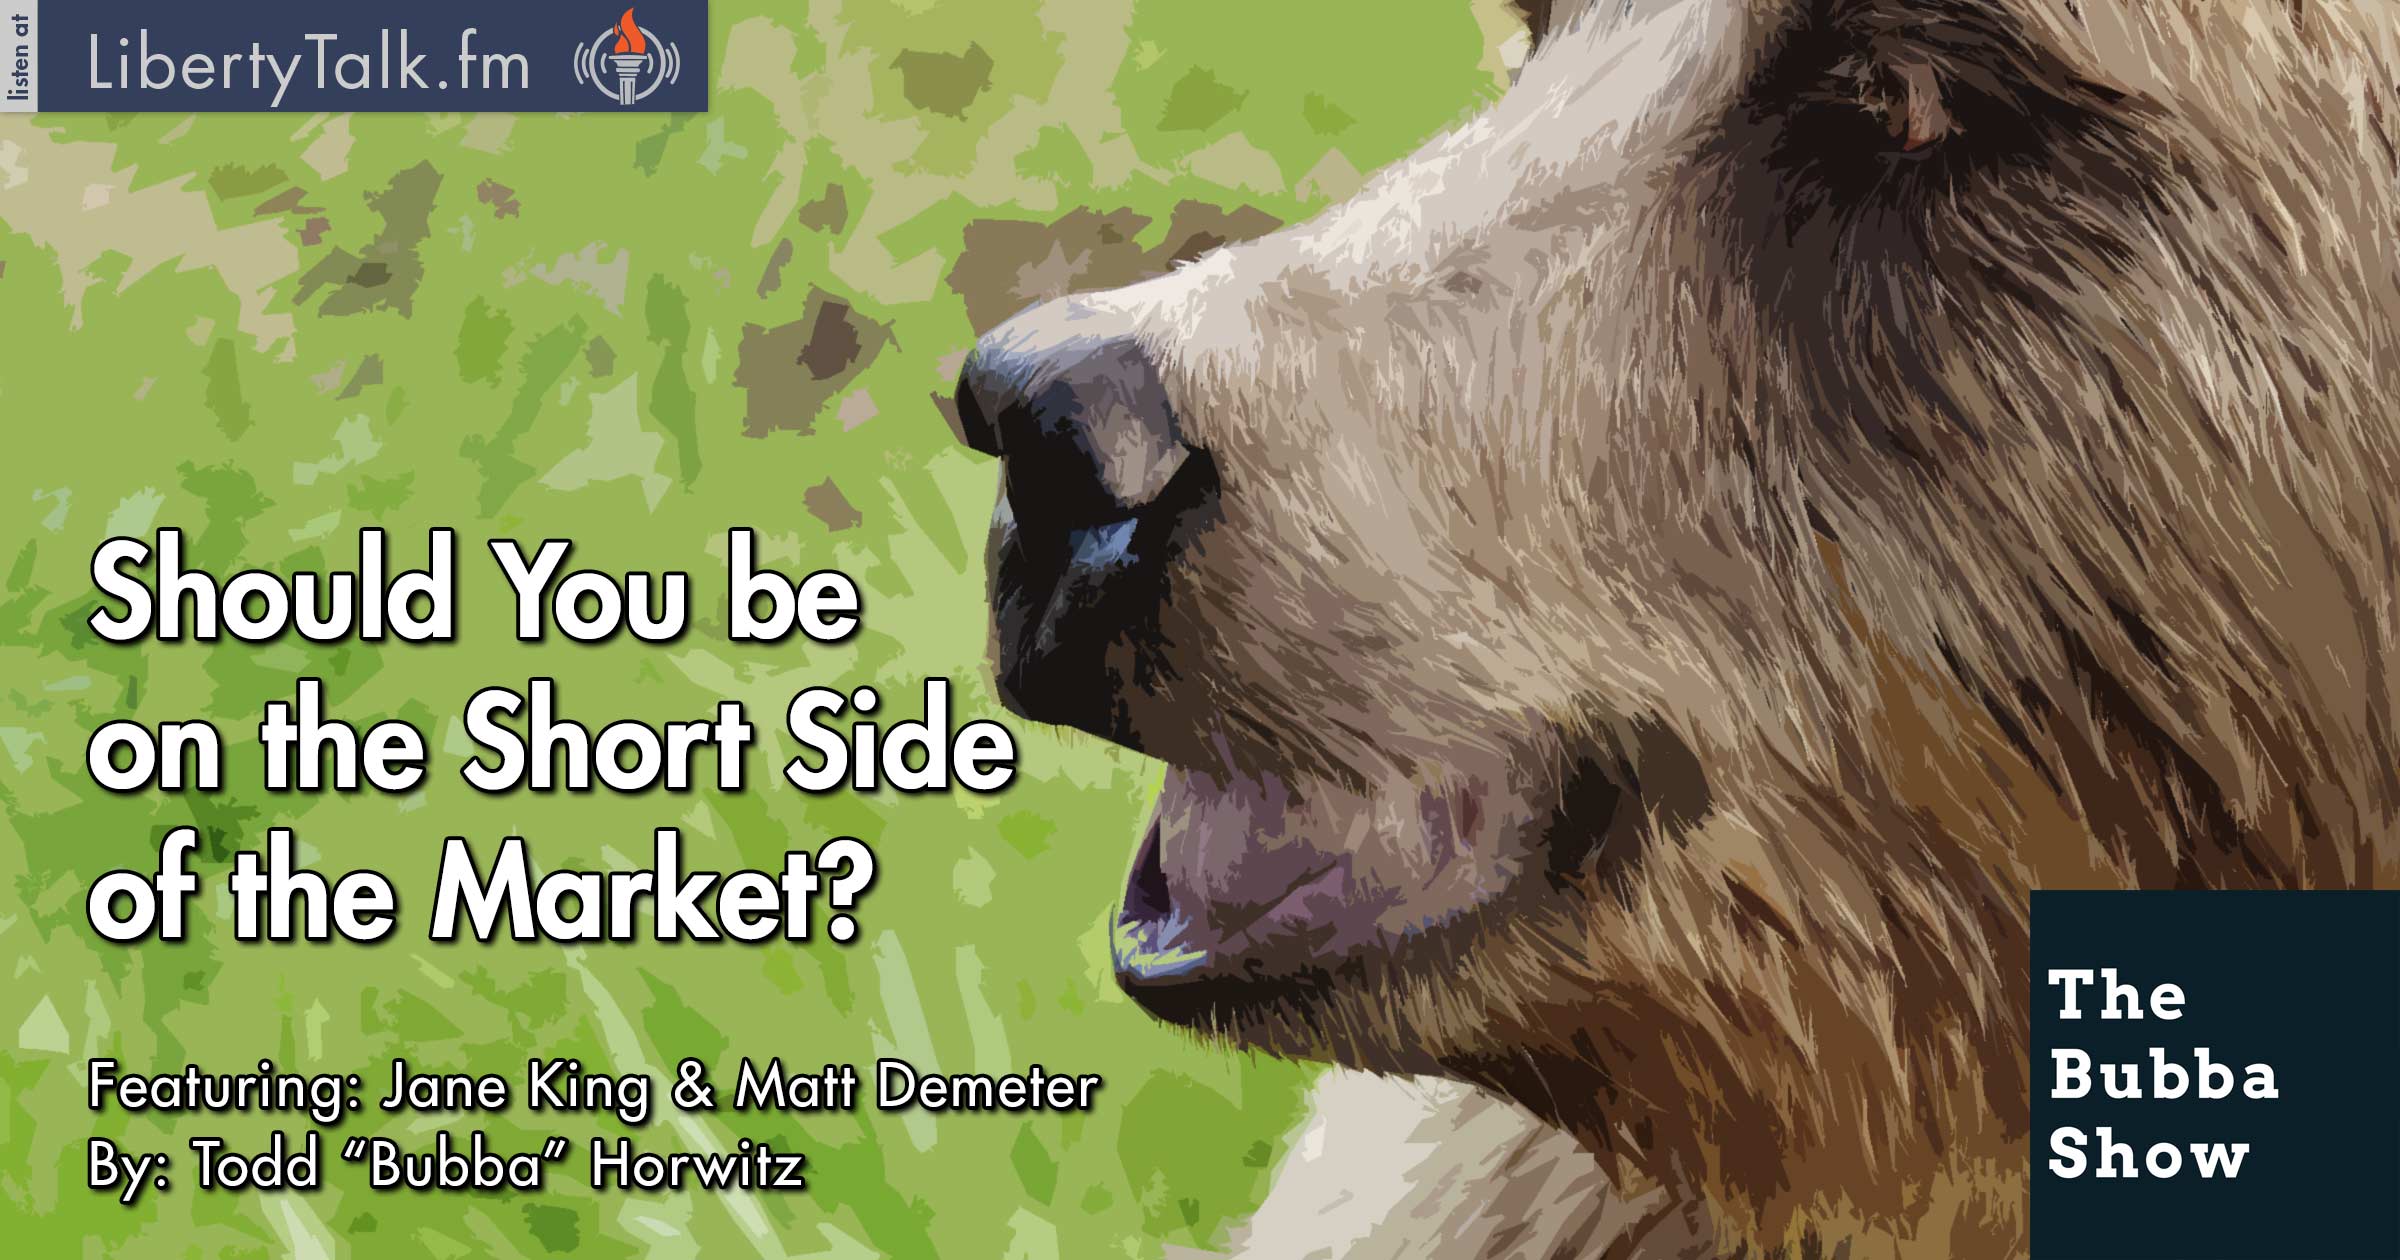 Should You be on the Short Side of the Market? - The Bubba Show